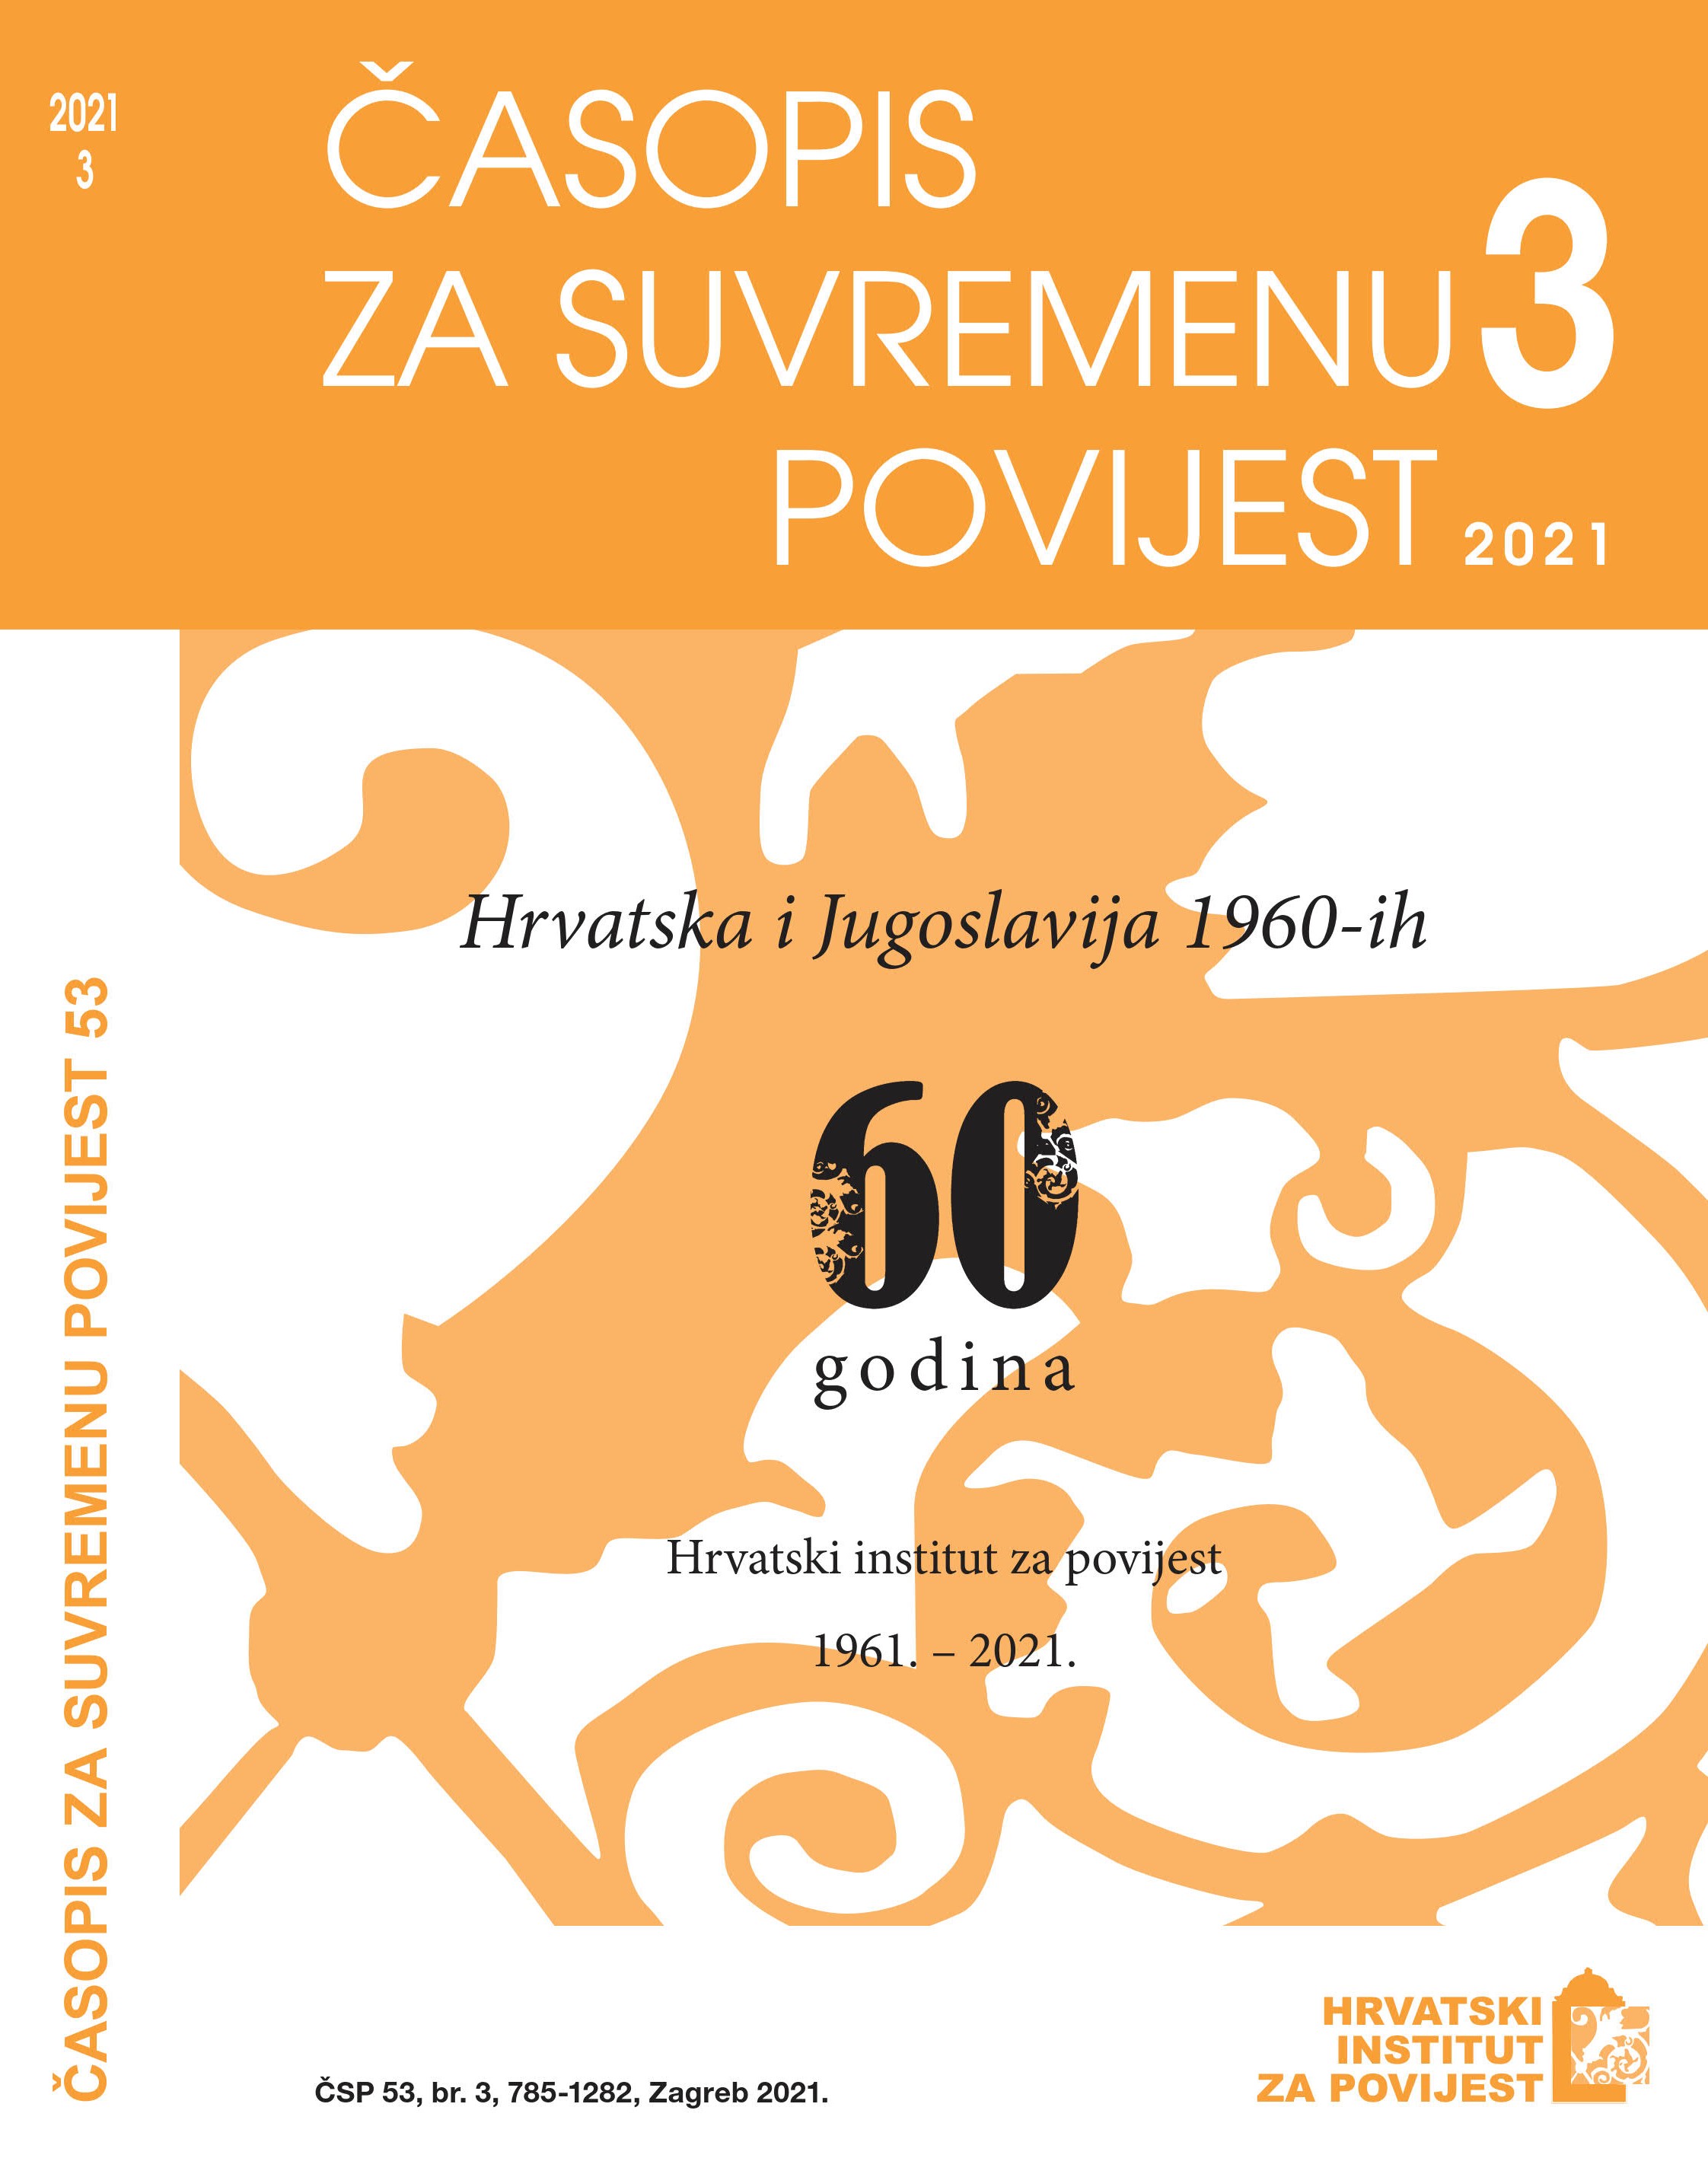 Touristic and Spatial Planning in Croatia and Yugoslavia in the 1960s Cover Image